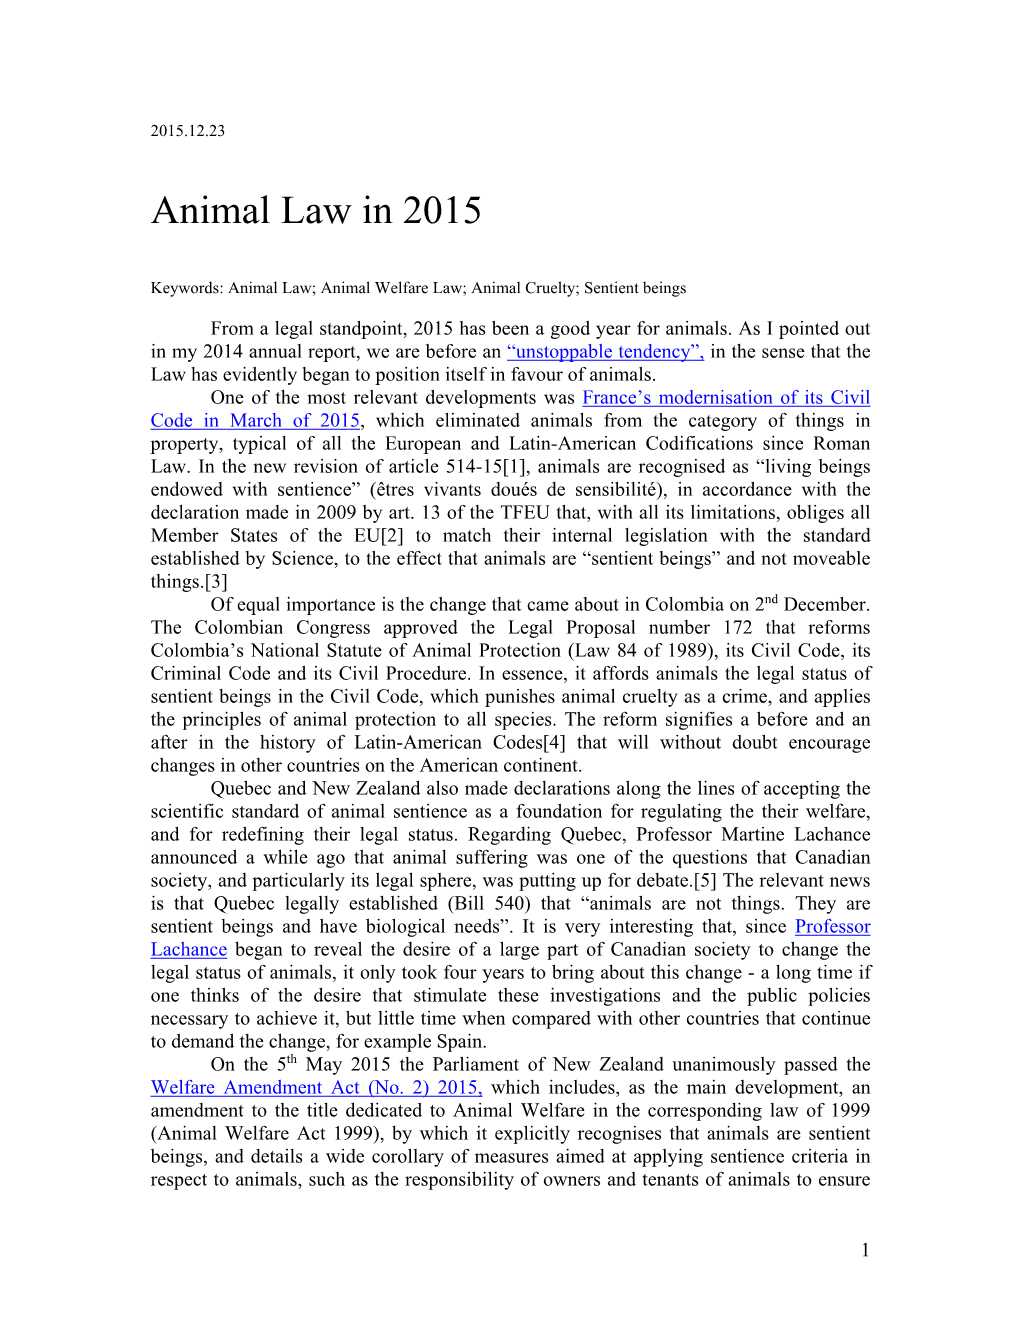 Animal Law in 2015